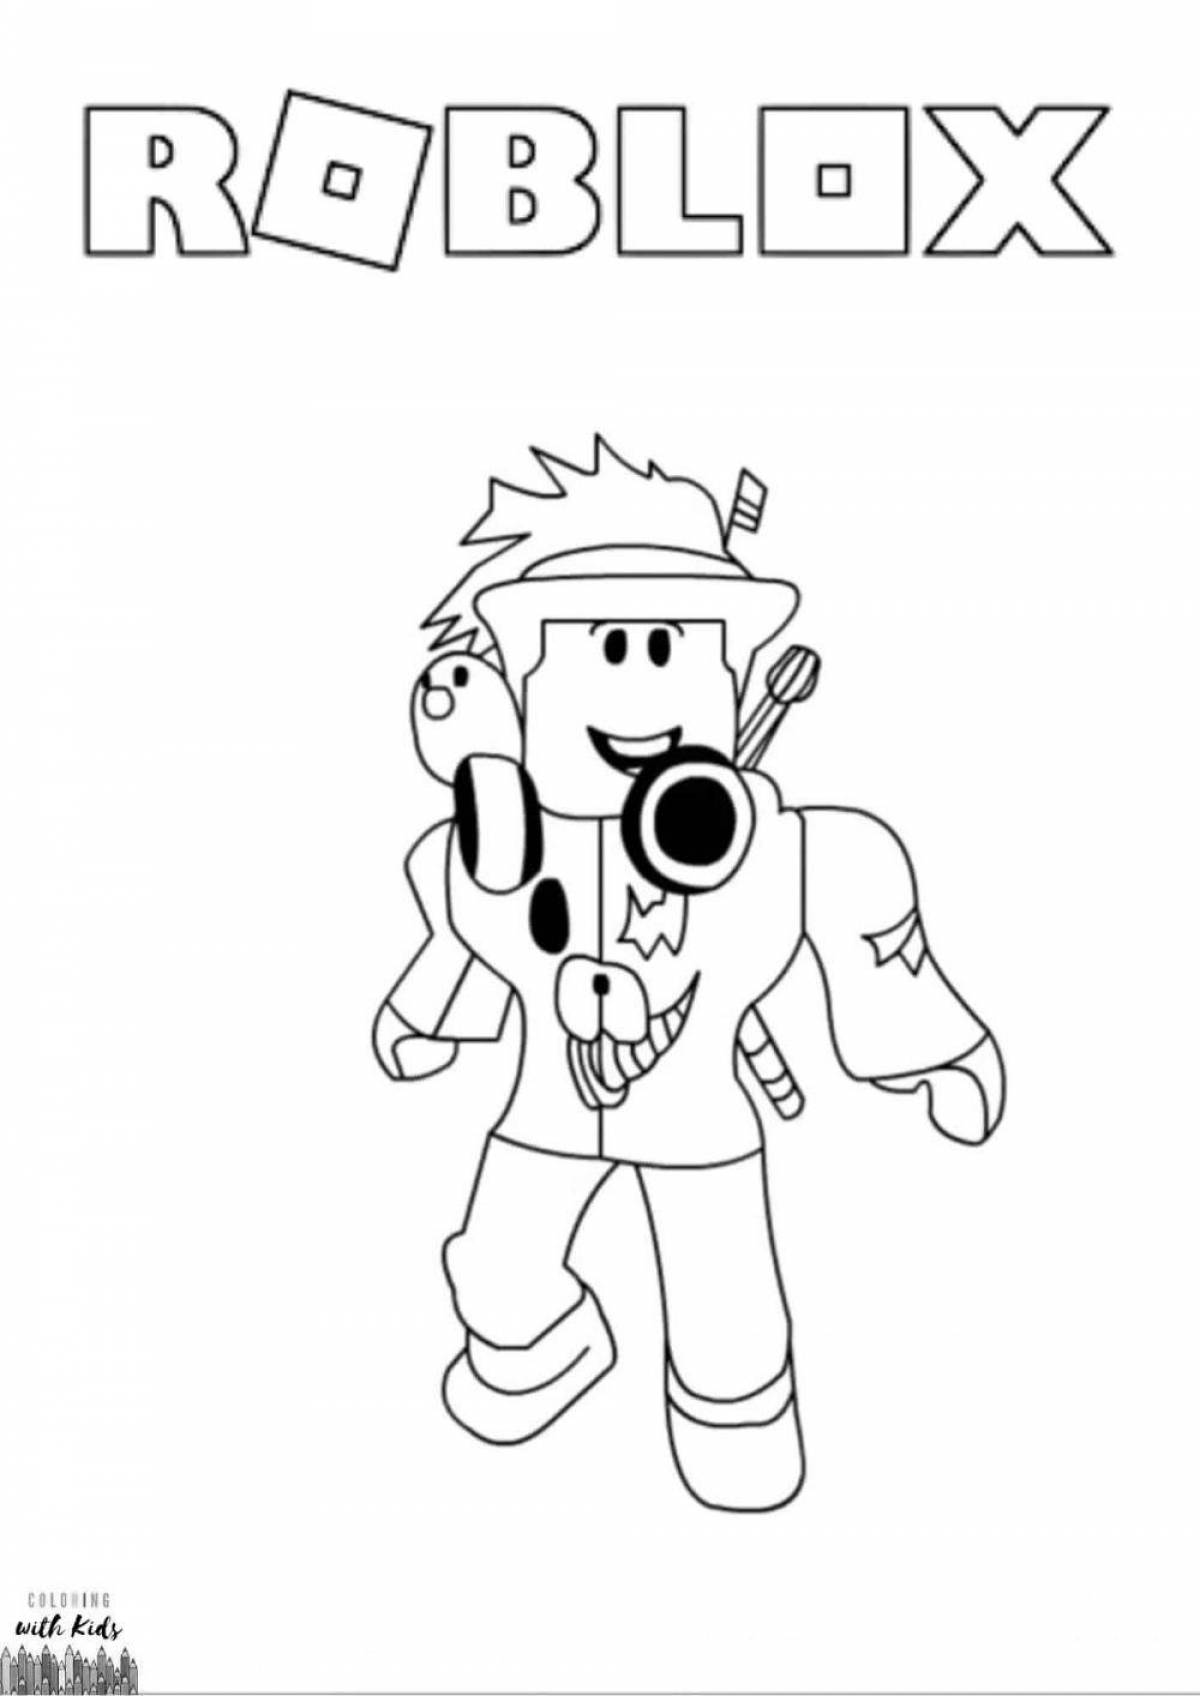 Attractive roblox player coloring page